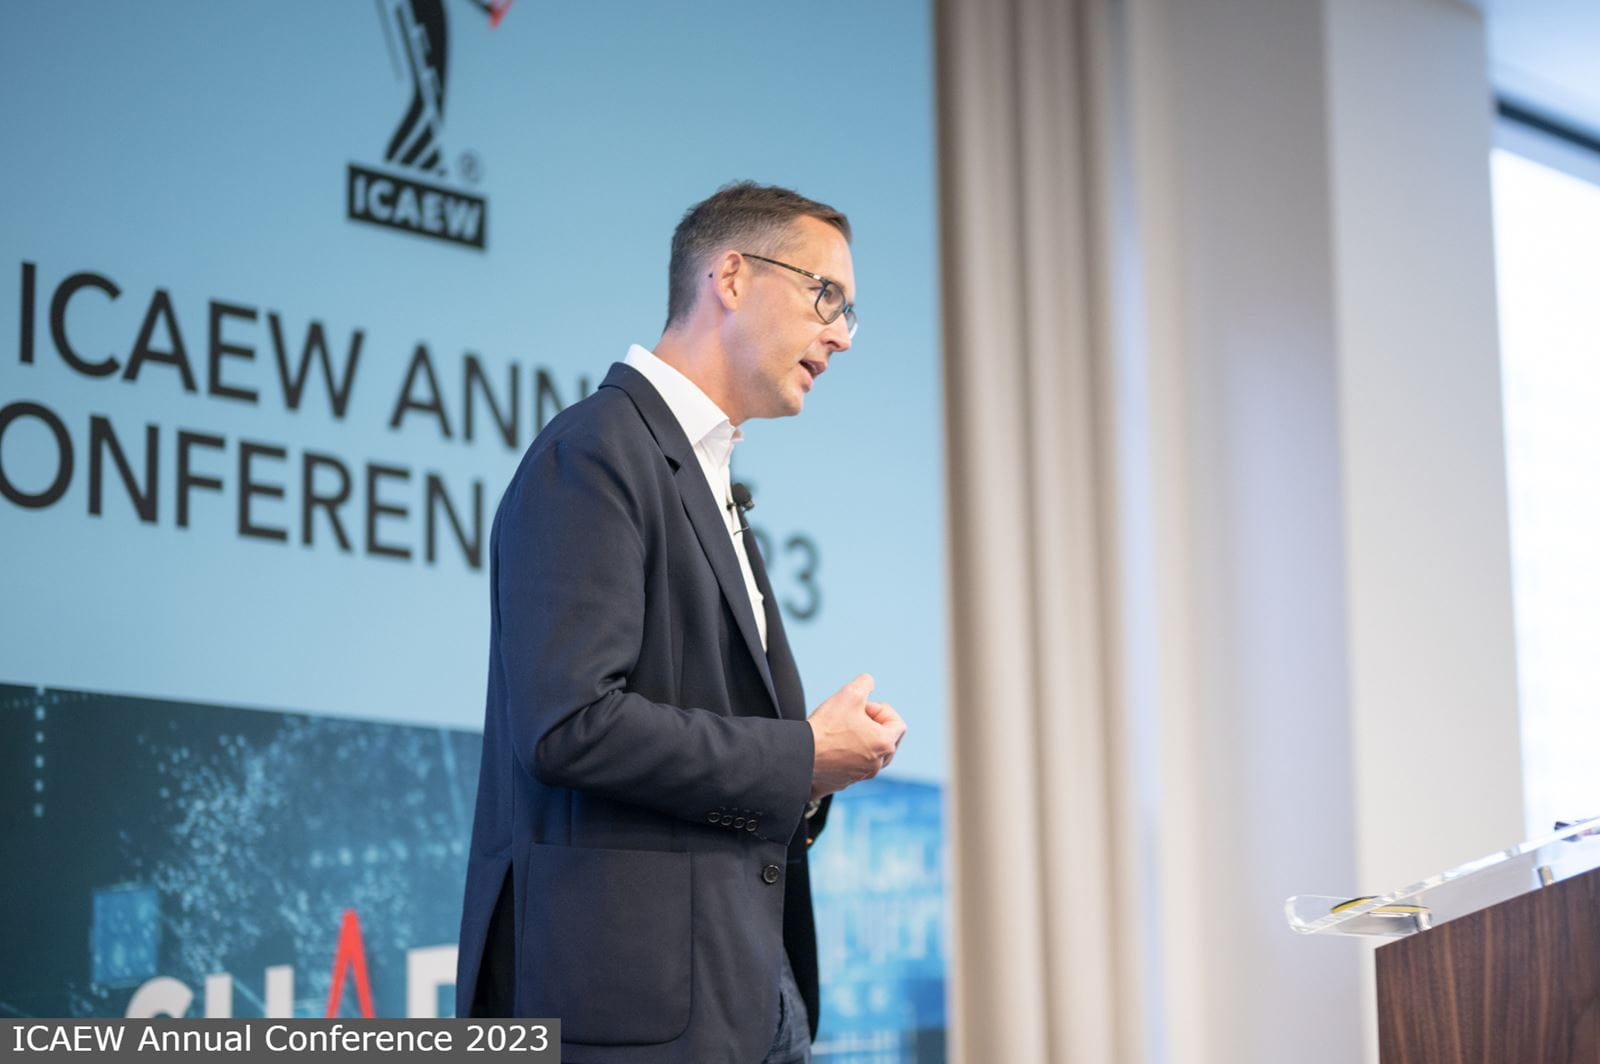 ICAEW Annual Conference 2023